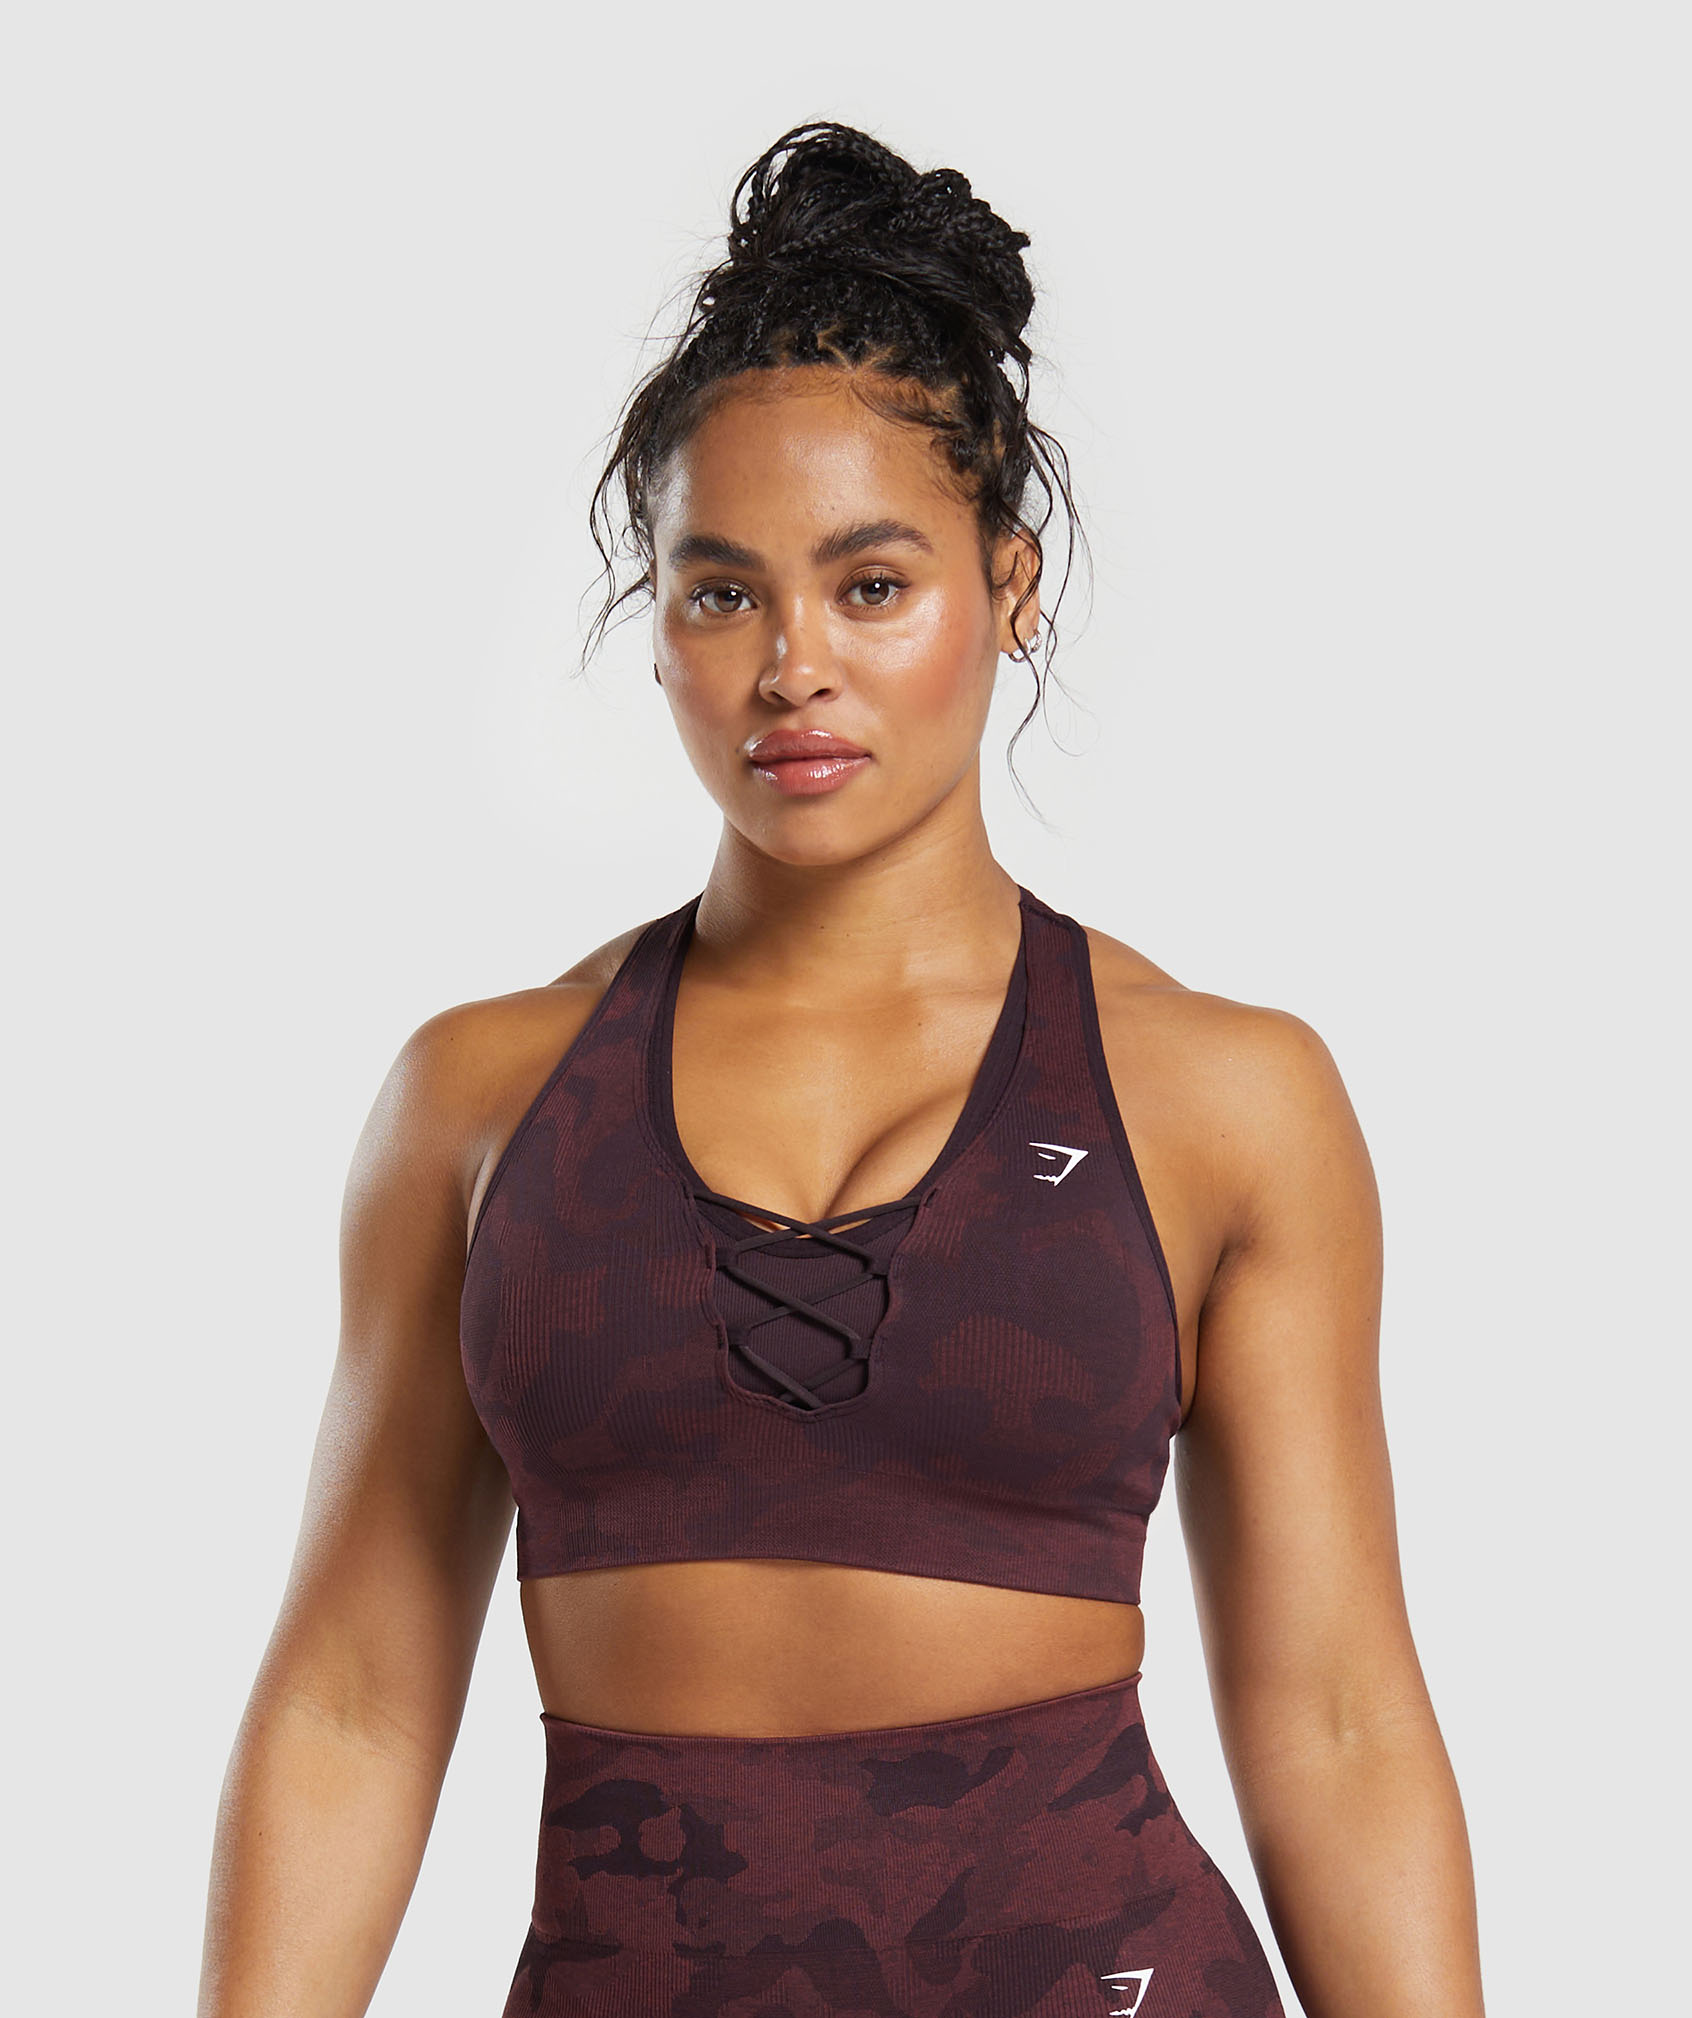 How To Wear A Sports Bra & Choose The Perfect Fit - keep it simpElle